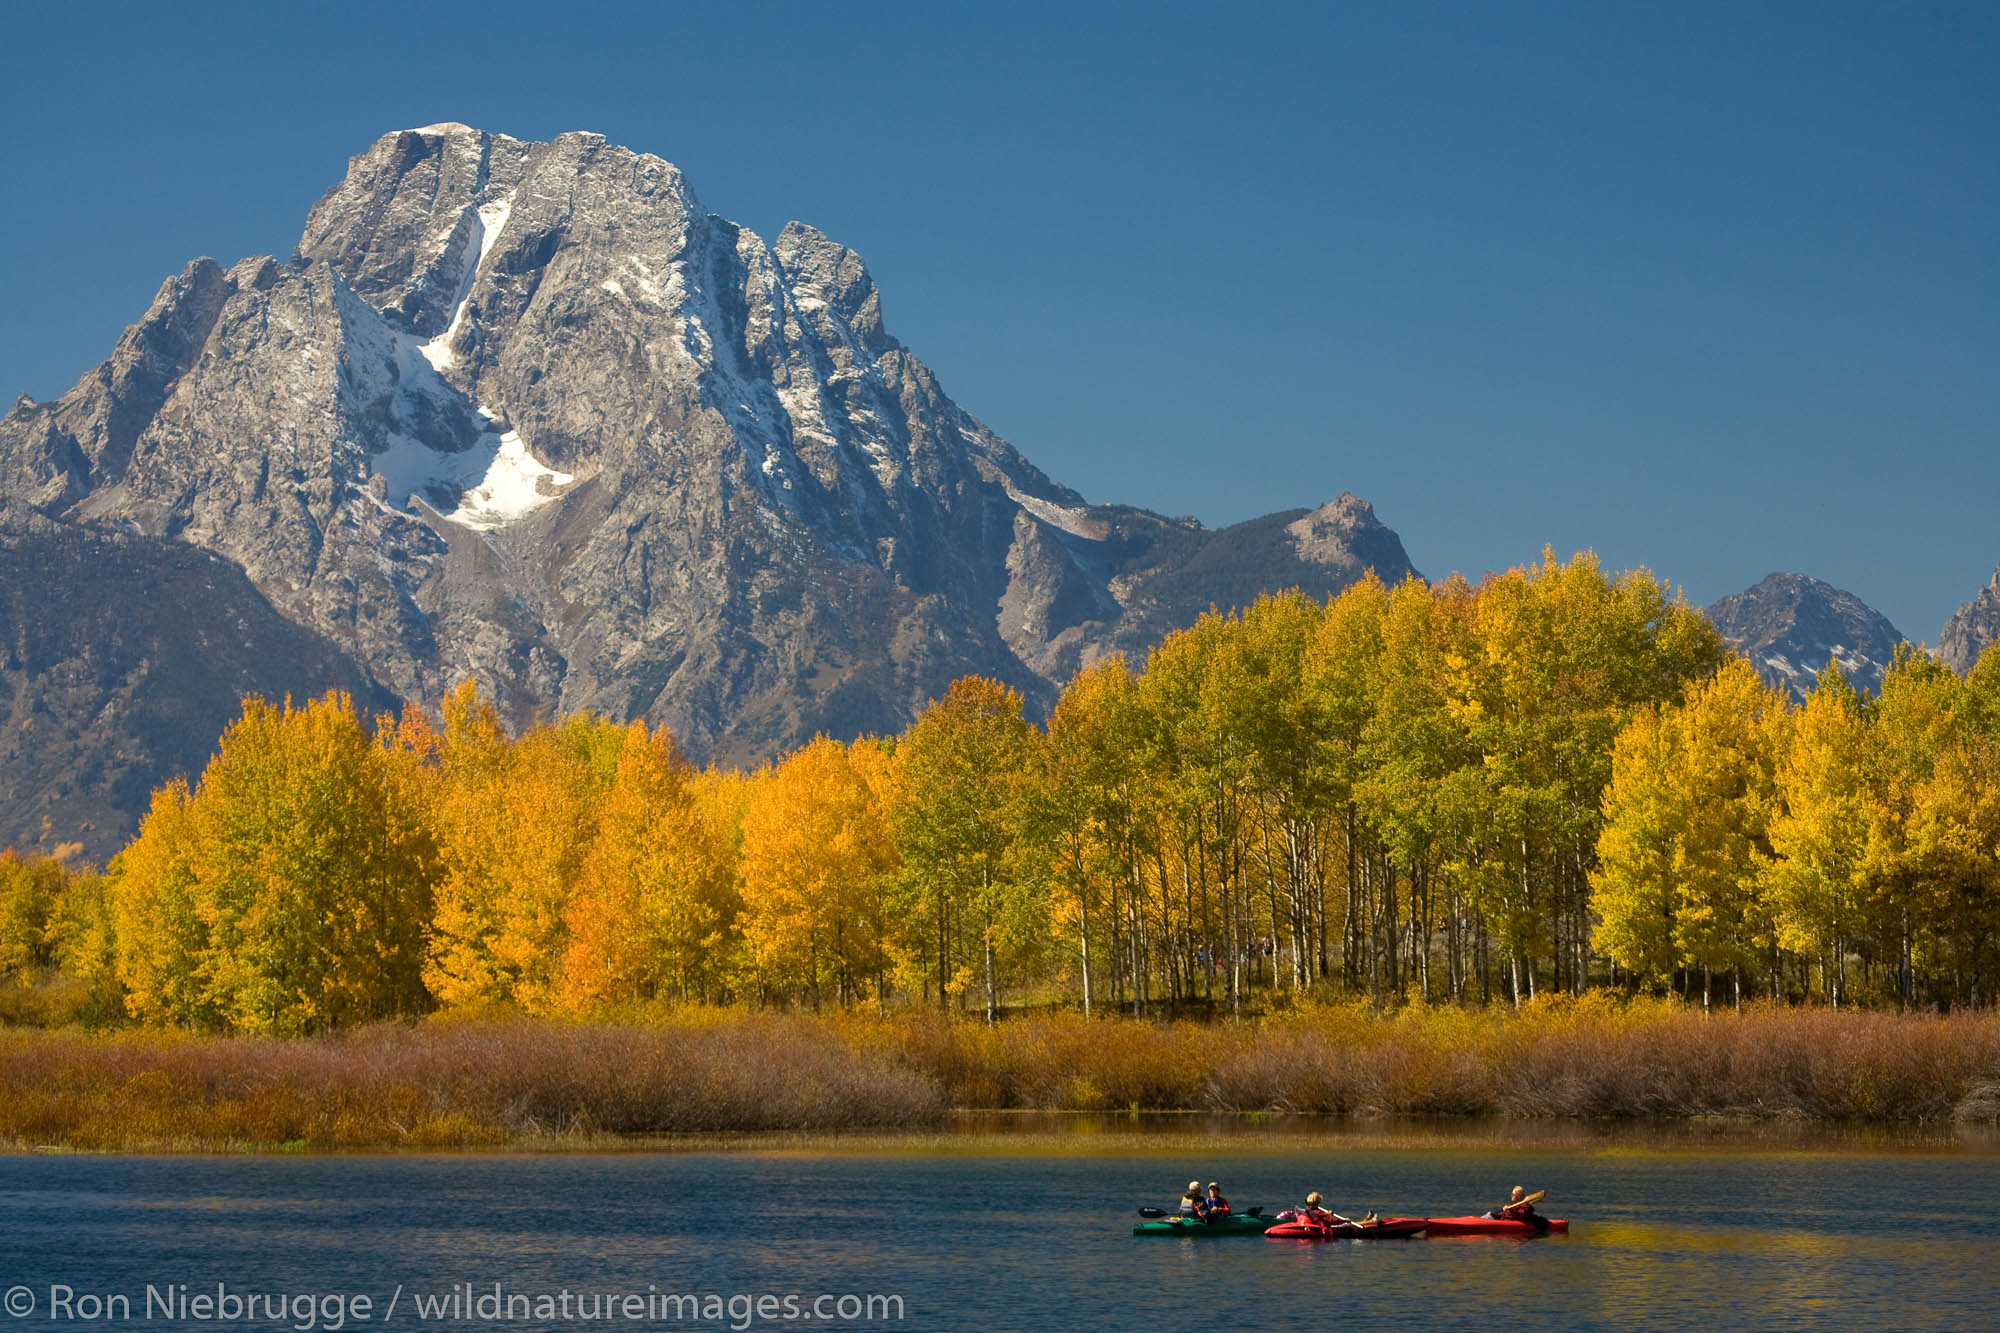 Kayakers and Mount Moran from Oxbow Bend, Grand Teton National Park, Wyoming.